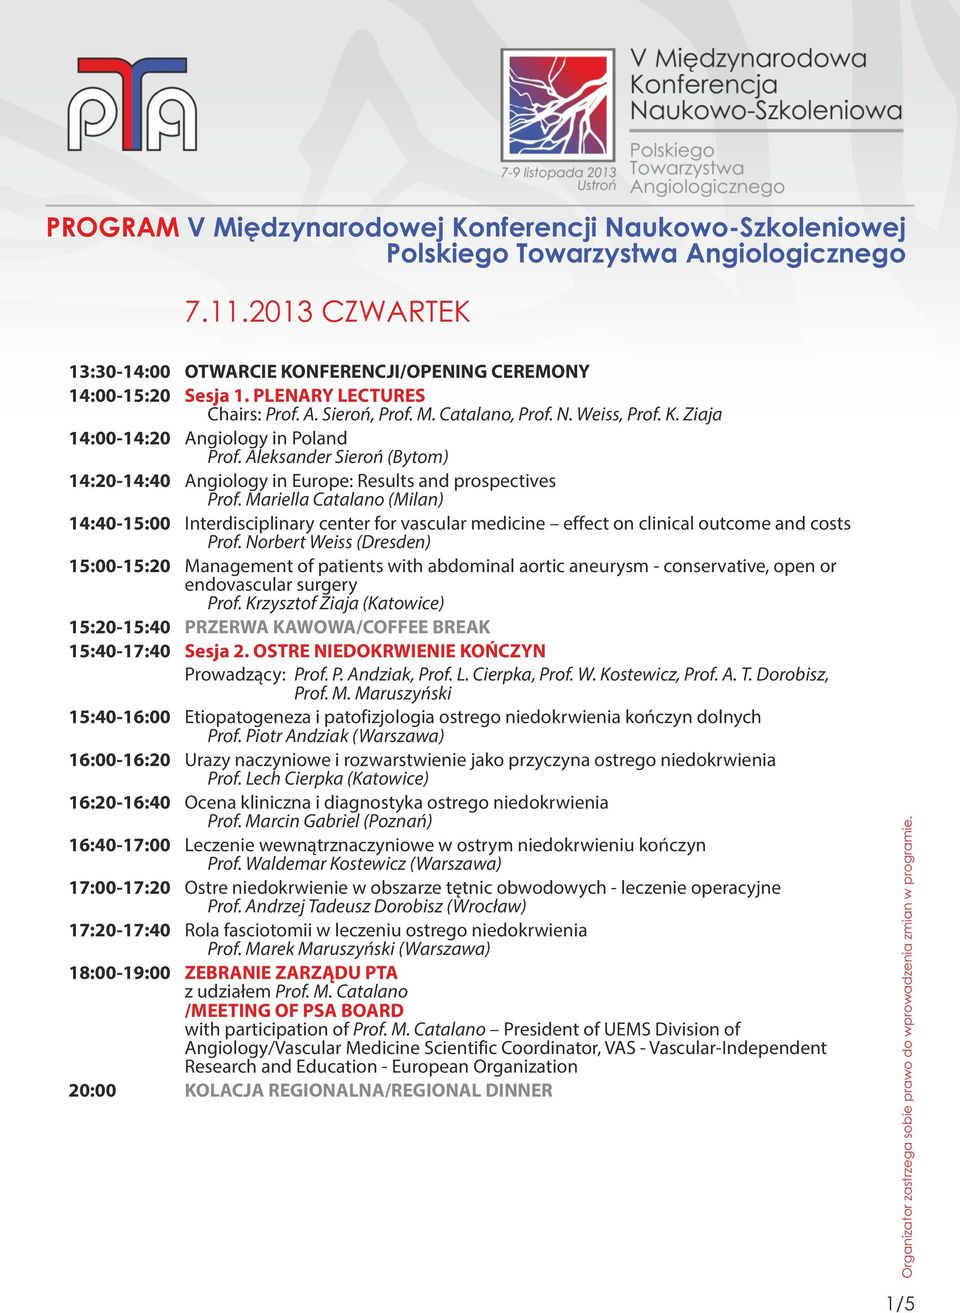 Norbert Weiss (Dresden) 15:00-15:20 Management of patients with abdominal aortic aneurysm - conservative, open or endovascular surgery Prof.